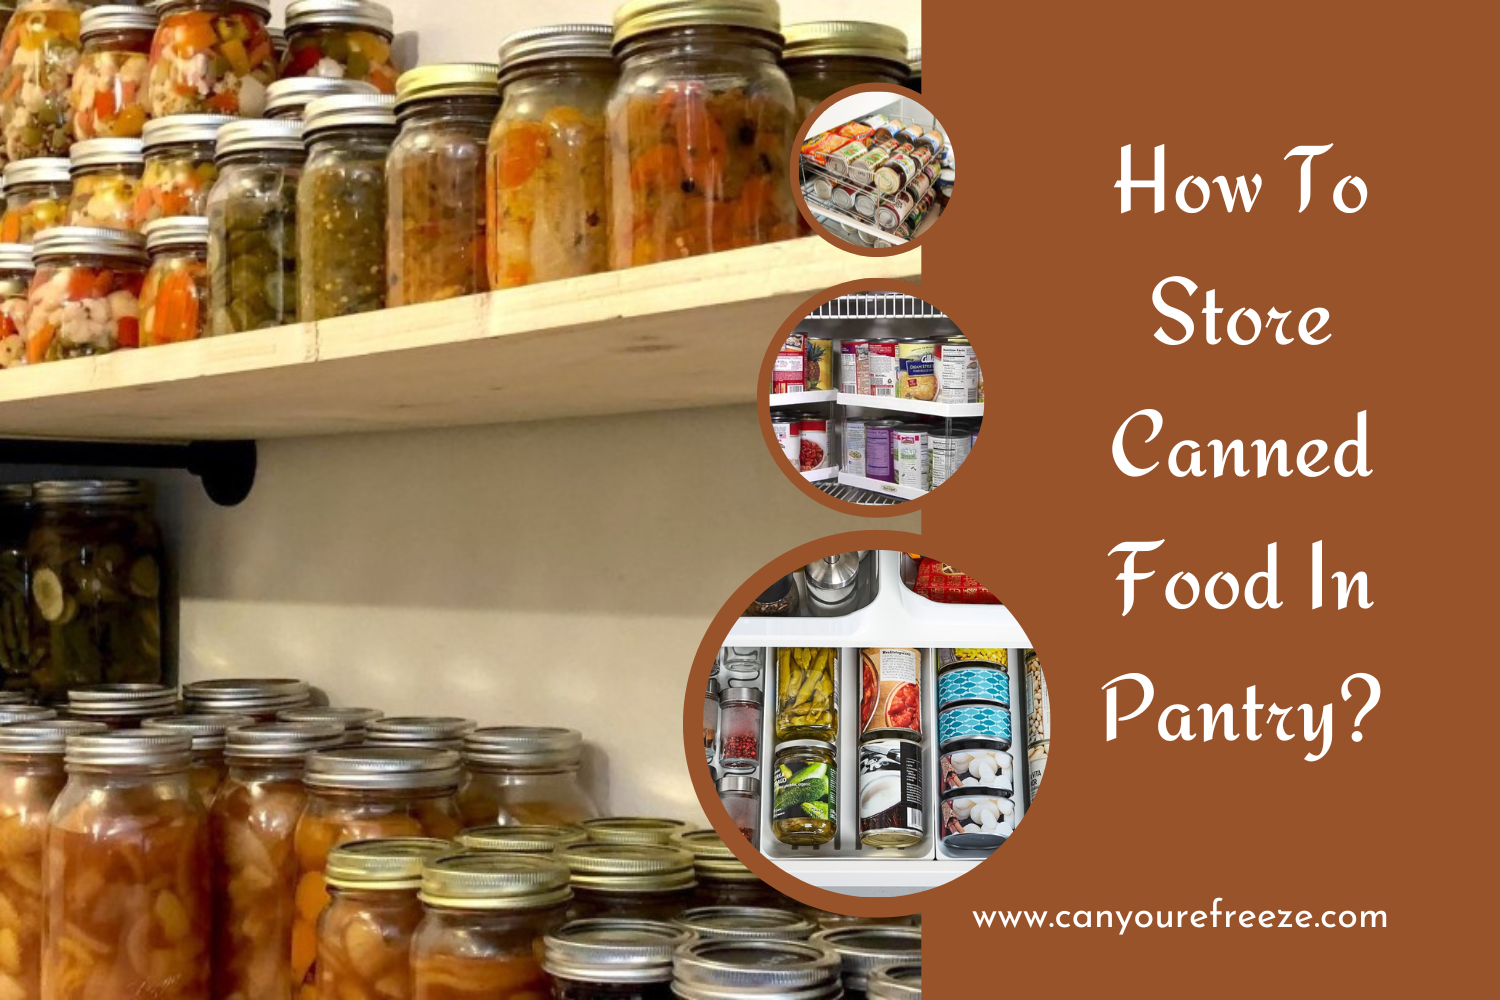 How To Store Canned Food In Pantry